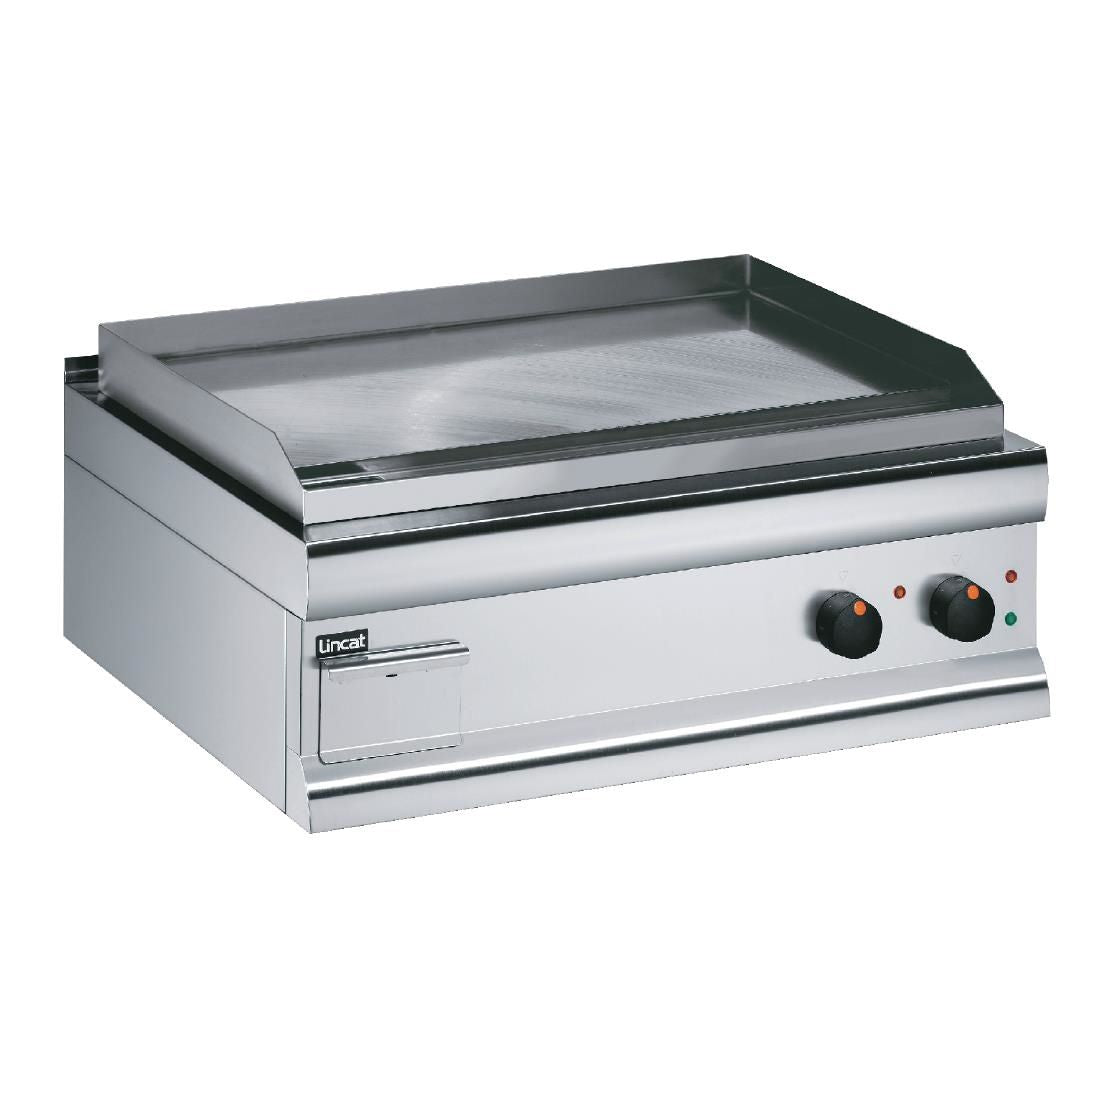 GS7 - Lincat Silverlink 600 Electric Counter-top Griddle - Steel Plate - W 750 mm - 6.0 kW JD Catering Equipment Solutions Ltd